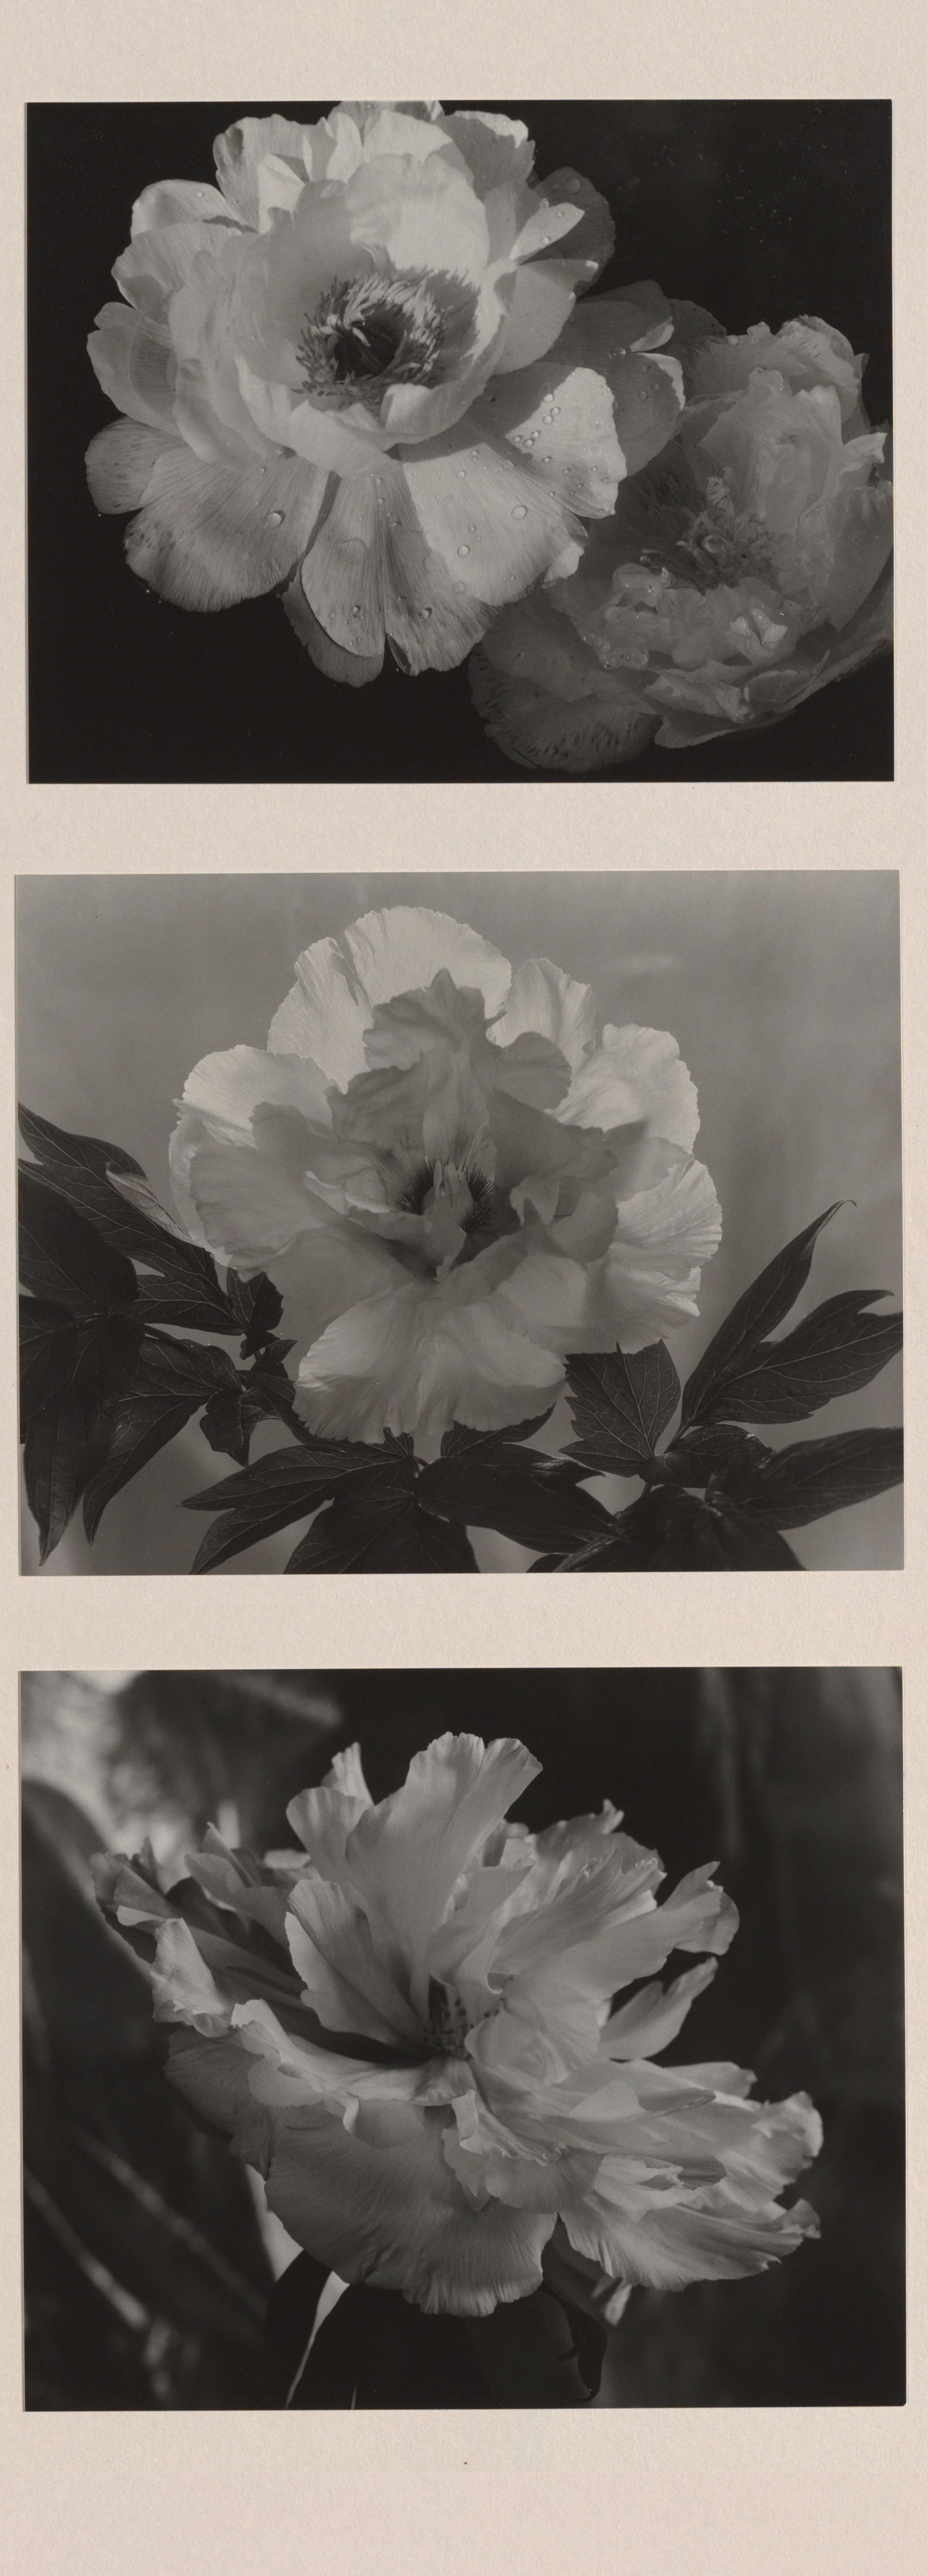 Minor White :: White tree peony (Jap.), mid 1950s-1960s; published 1968. [Photographs of tree peonies] at internet archive